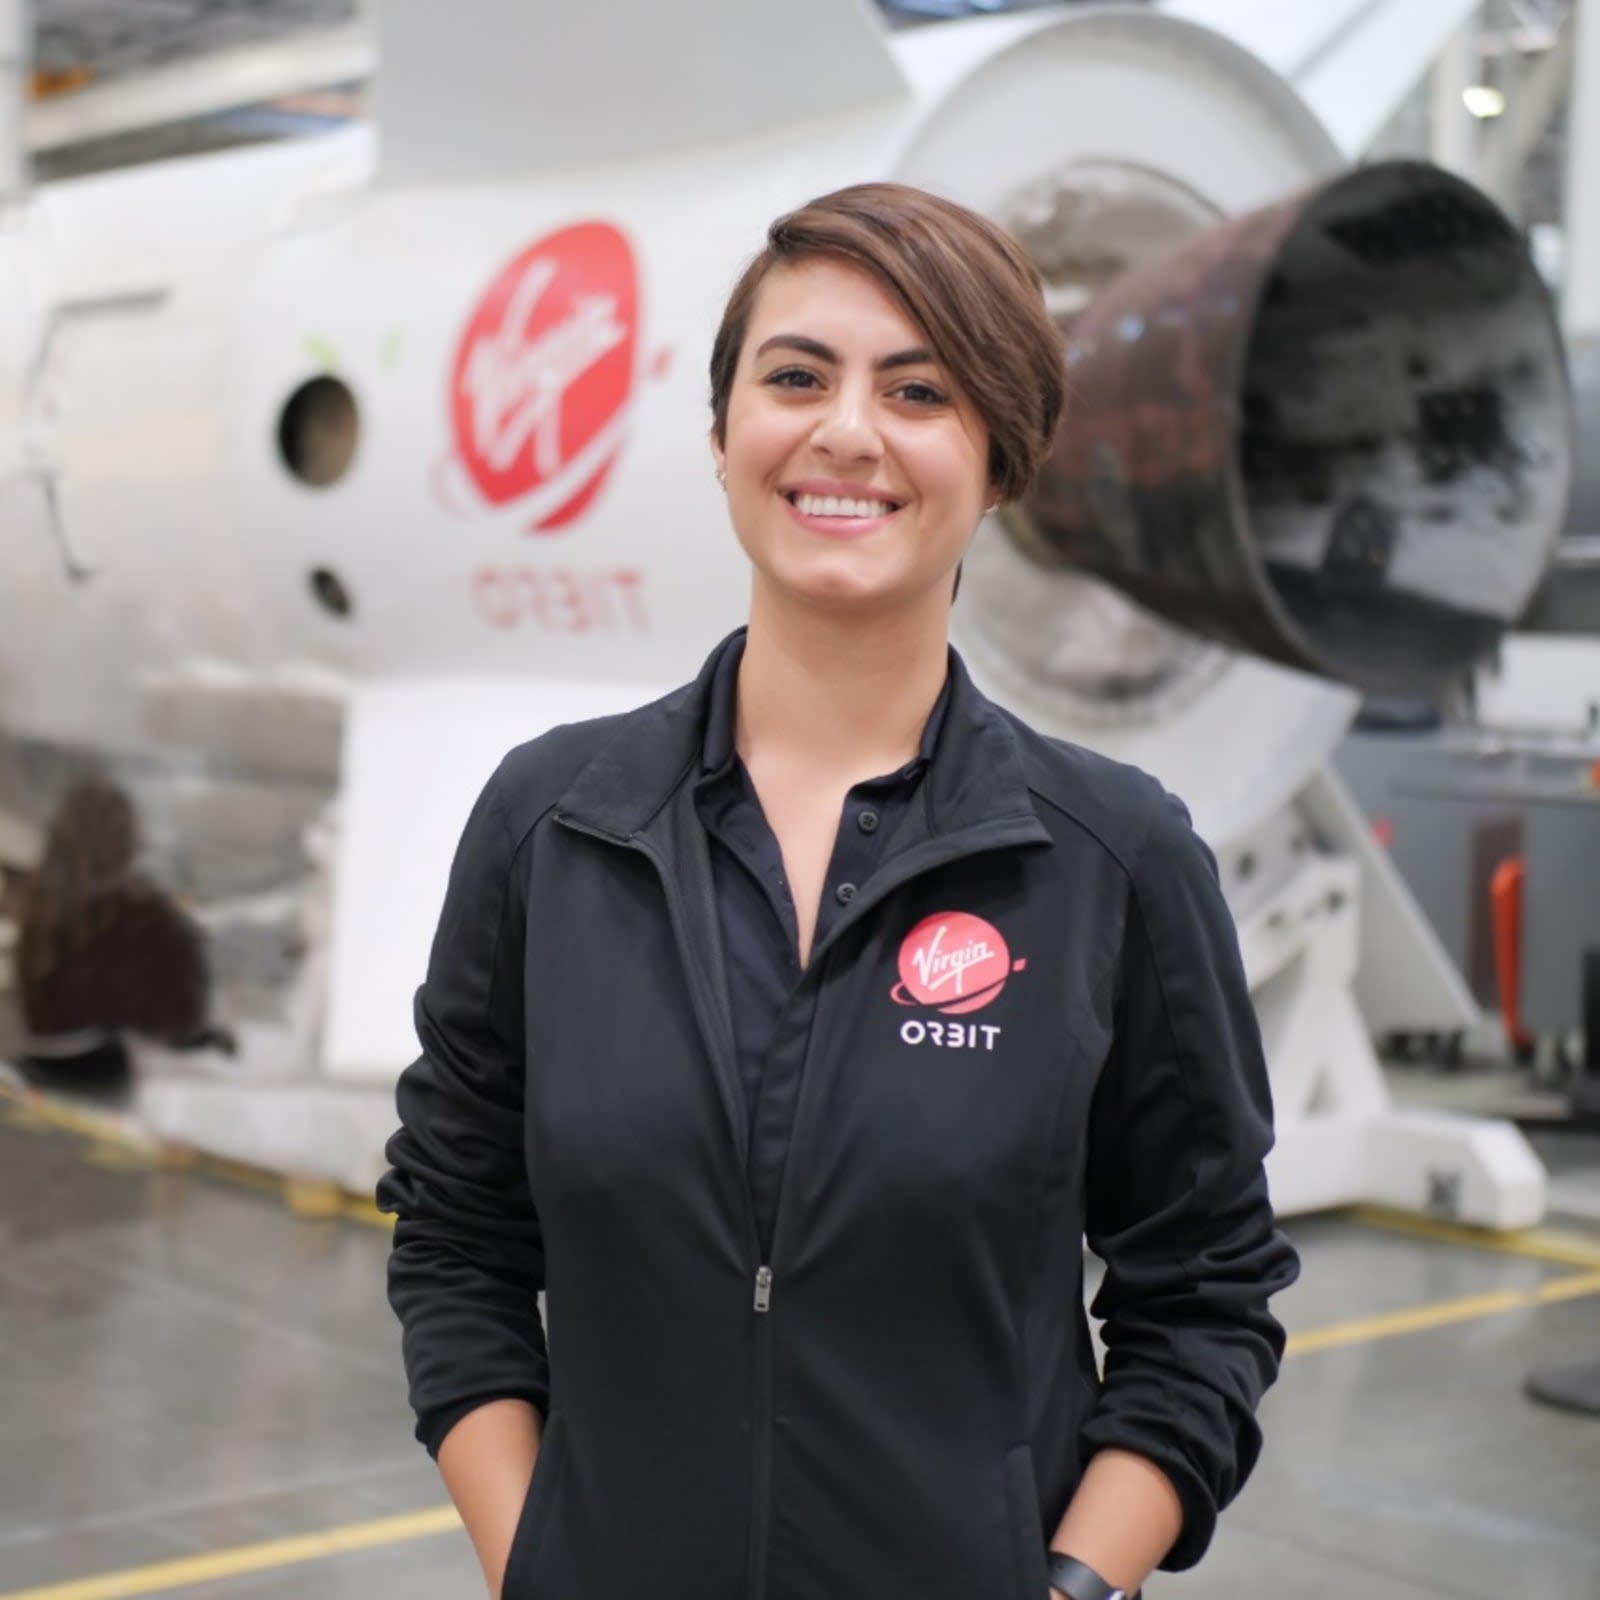 Diana Alsindy from Virgin Orbit smiling to the camera in her uniform 